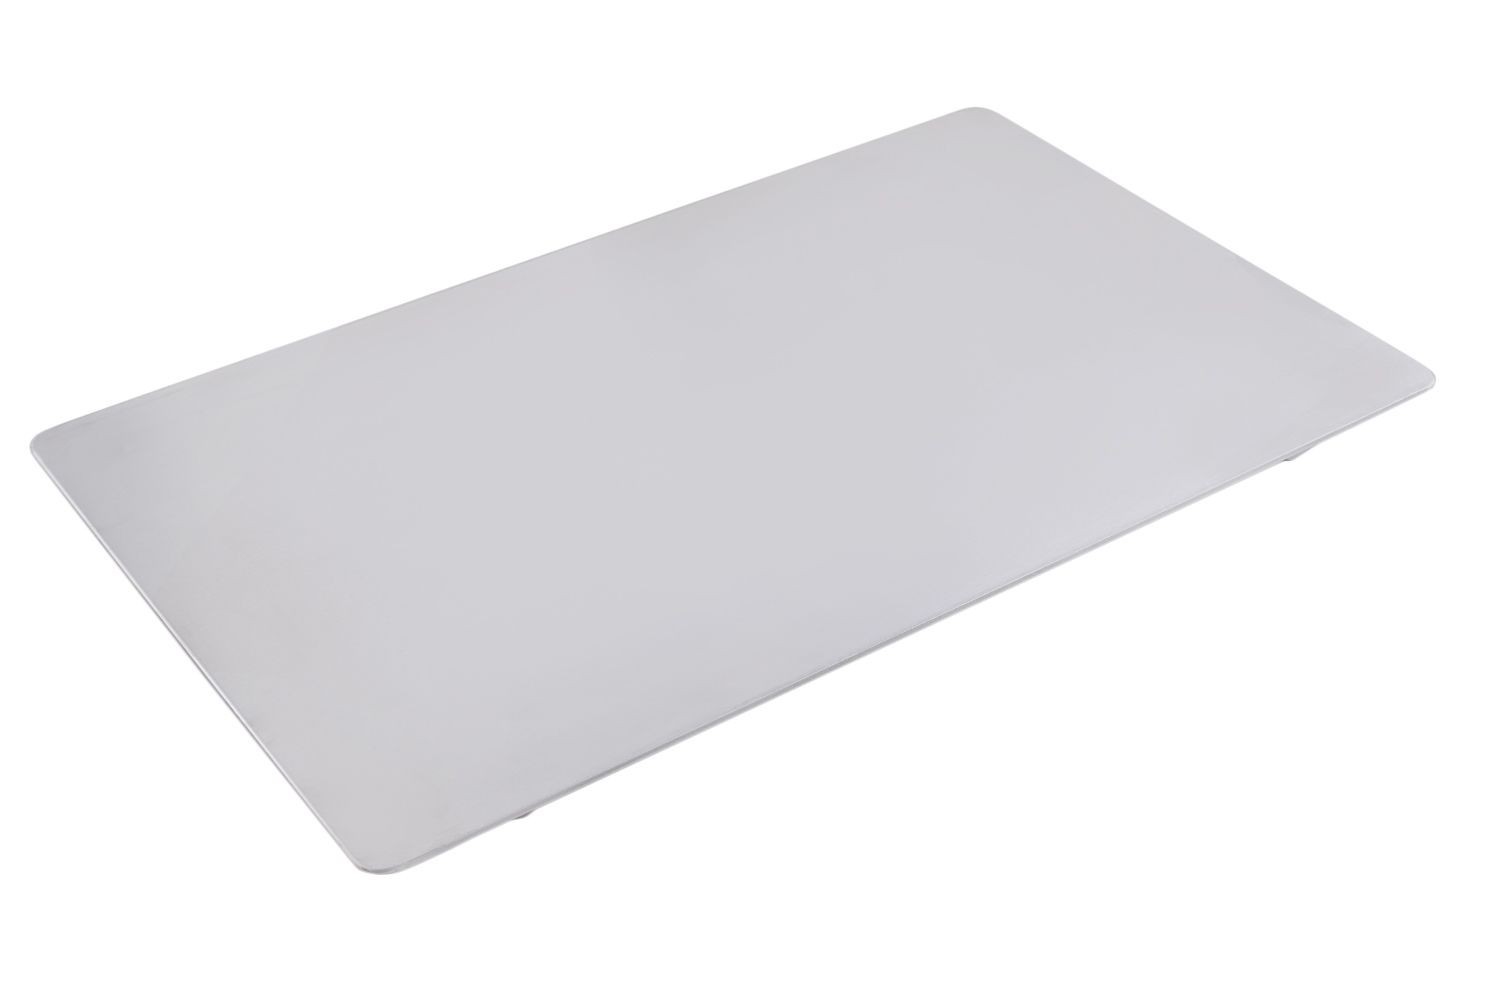 Bon Chef 96602 Stainless Steel Half Size Tile with Rectangles, 13 1/8" x 10 3/4"